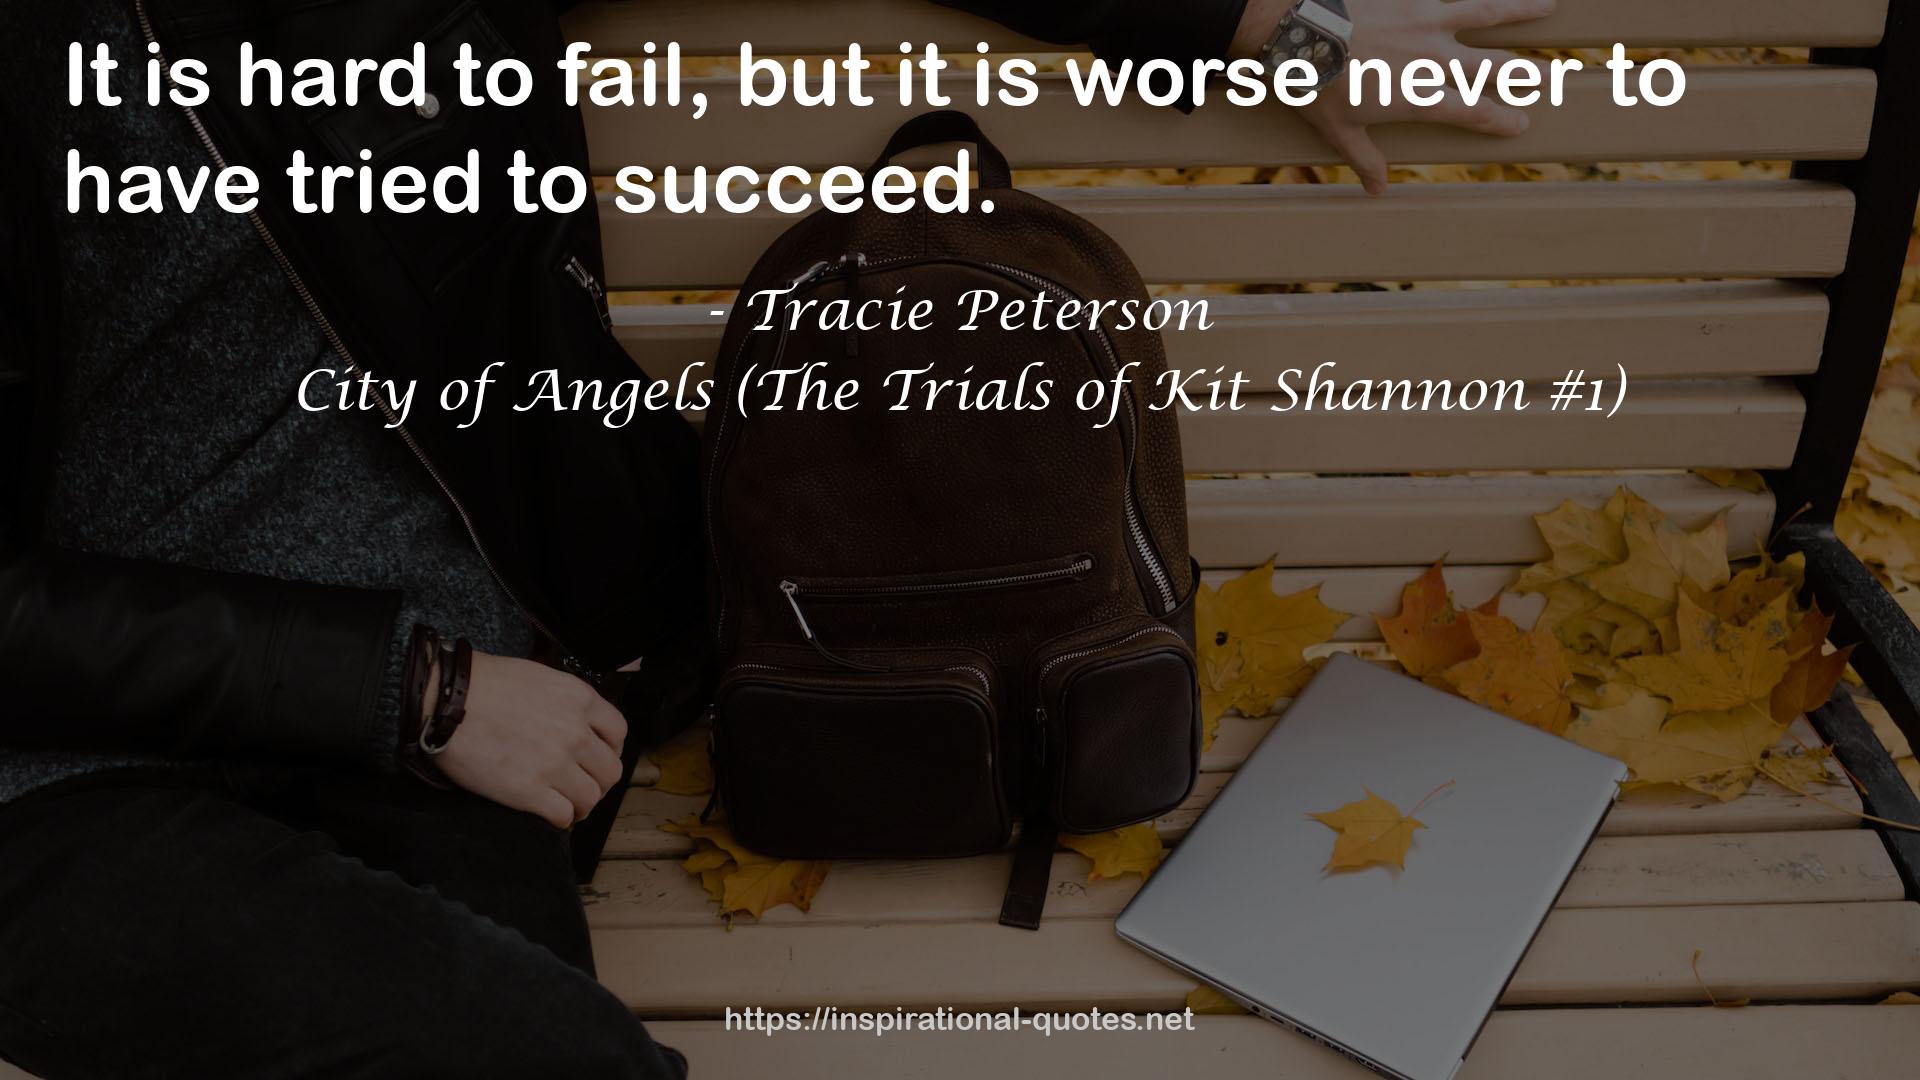 City of Angels (The Trials of Kit Shannon #1) QUOTES